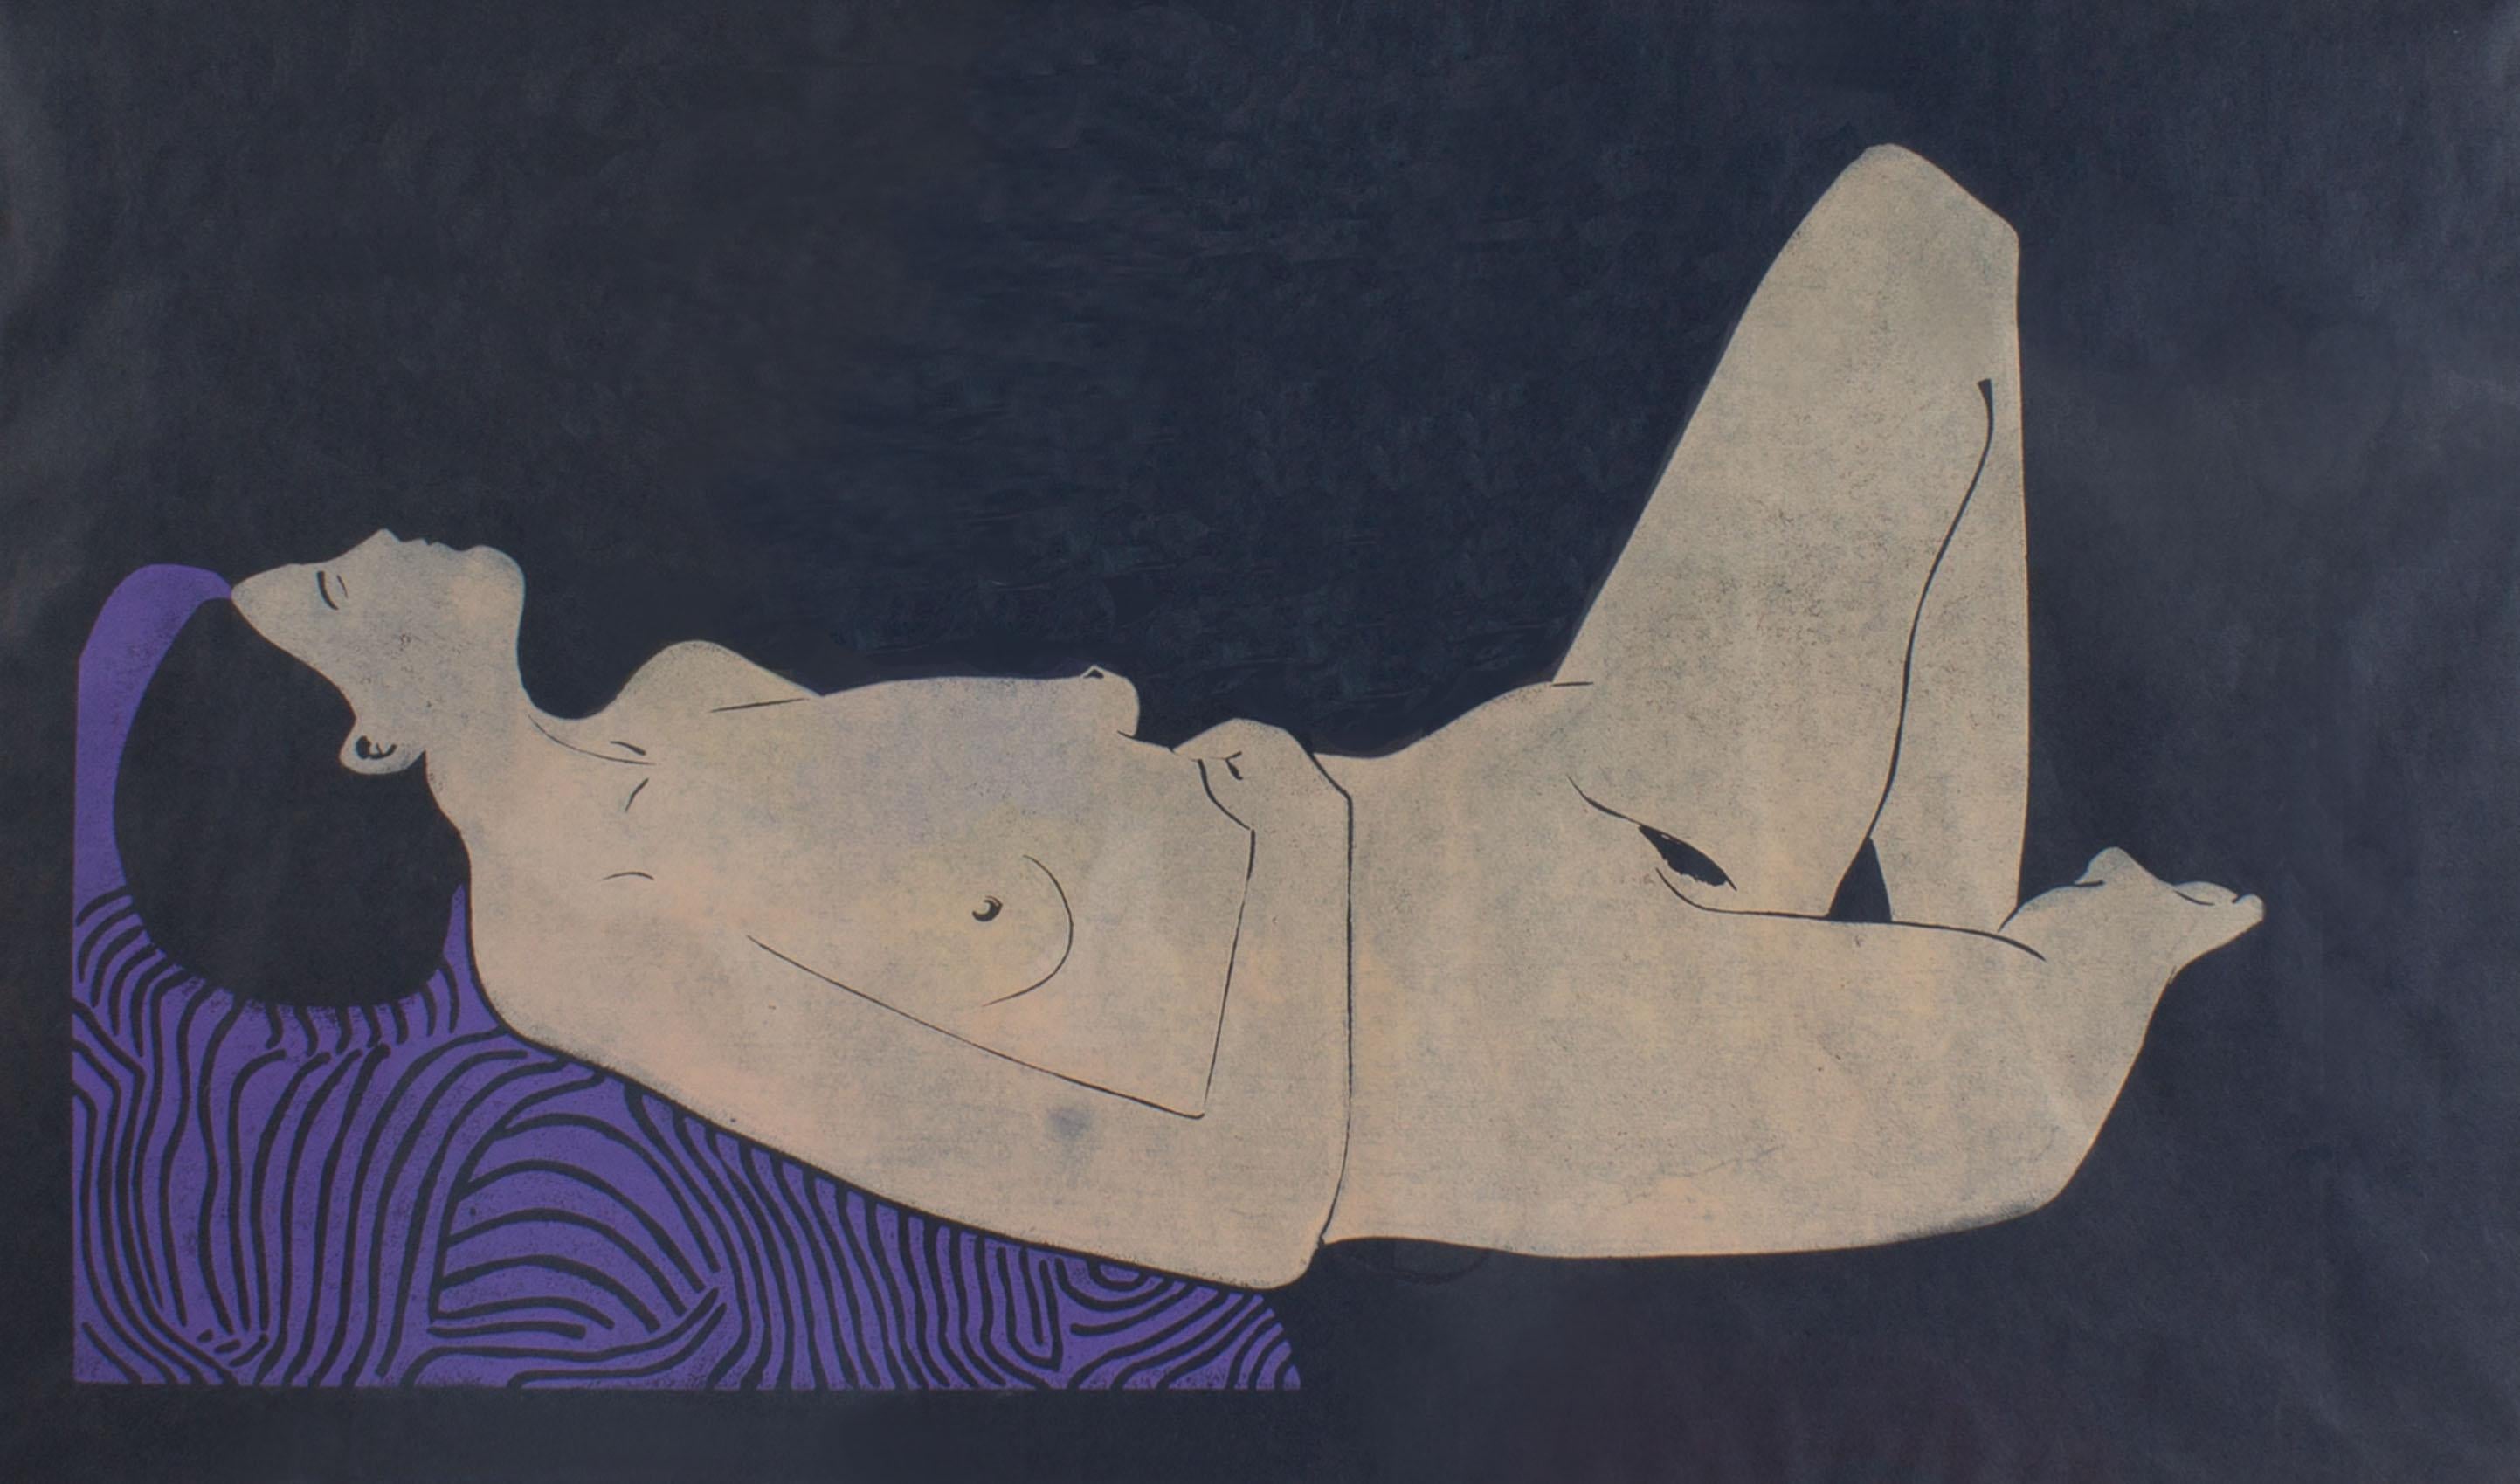 A limited edition relief print titled Nude by American artist Doug Delind (born 1947). A reclining nude female figure is depicted against a dark navy background in this abstract work. The figure in the composition rests on a purple cushion with an